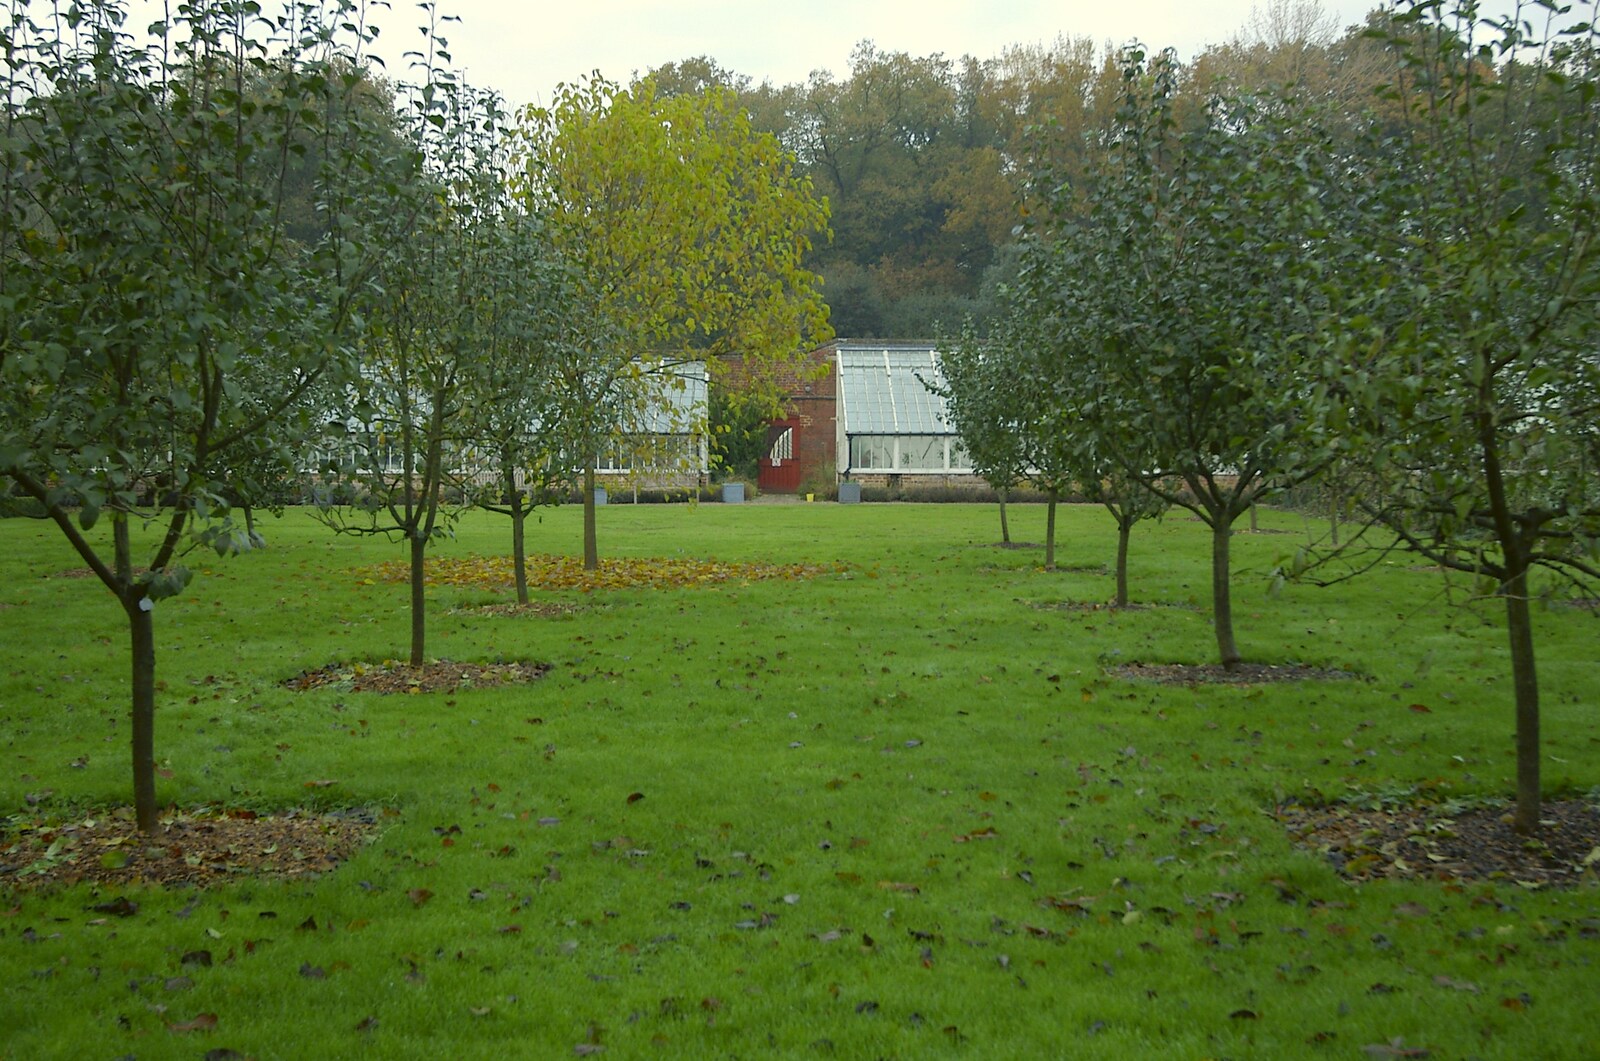 The fruit trees of the walled garden from Thornham Walled Garden, and Bob Last Leaves the Lab, Cambridge - 20th November 2005